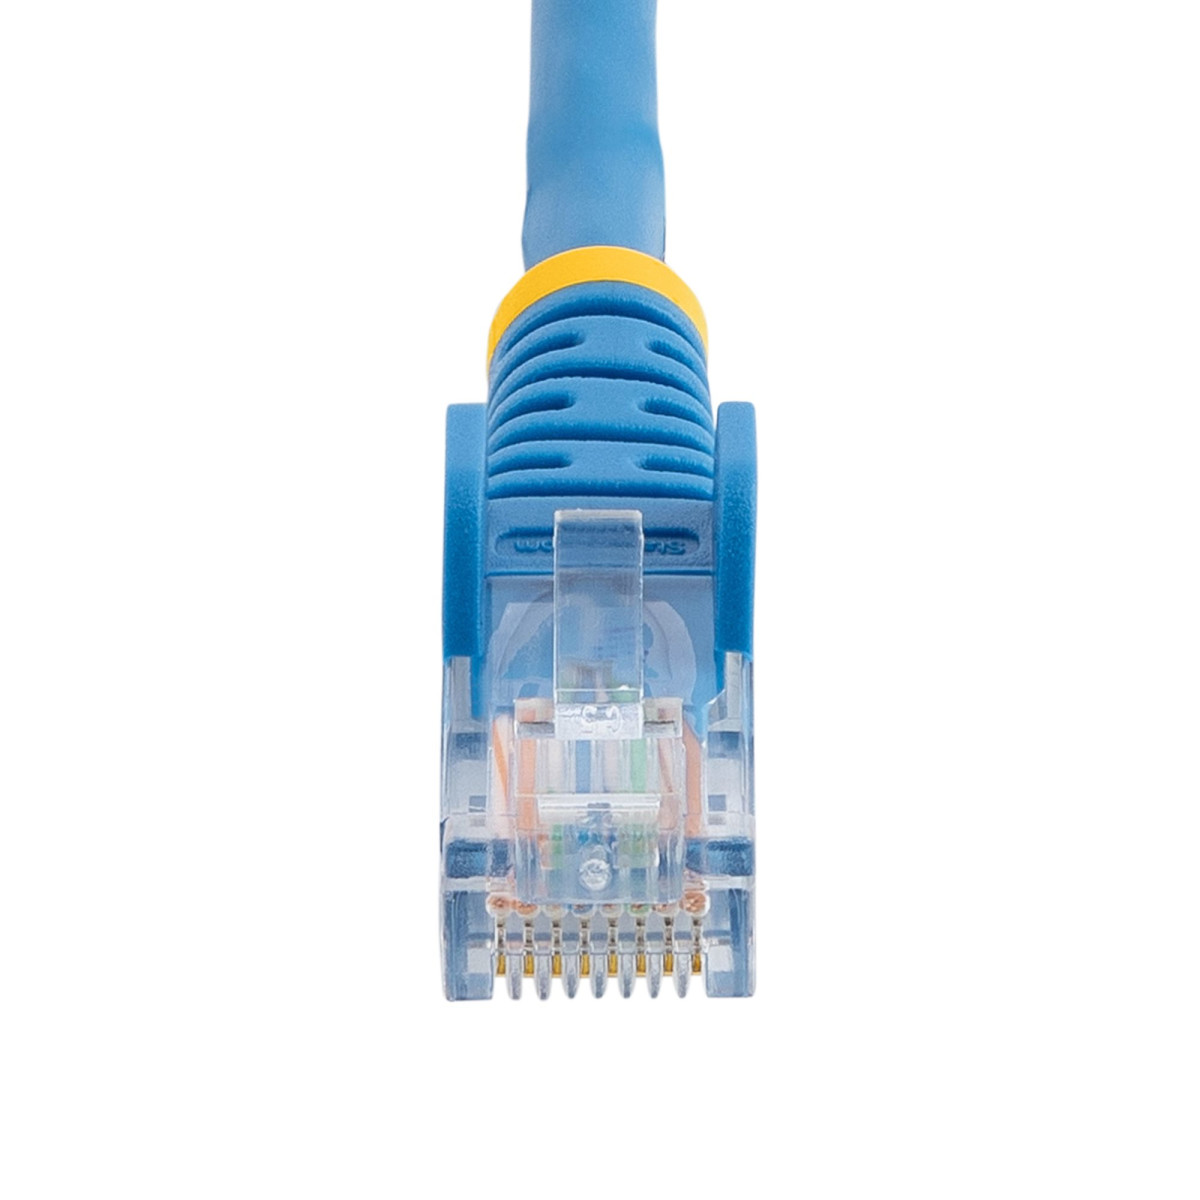 Blue Snagless Cat5e Patch Cable 0.5m